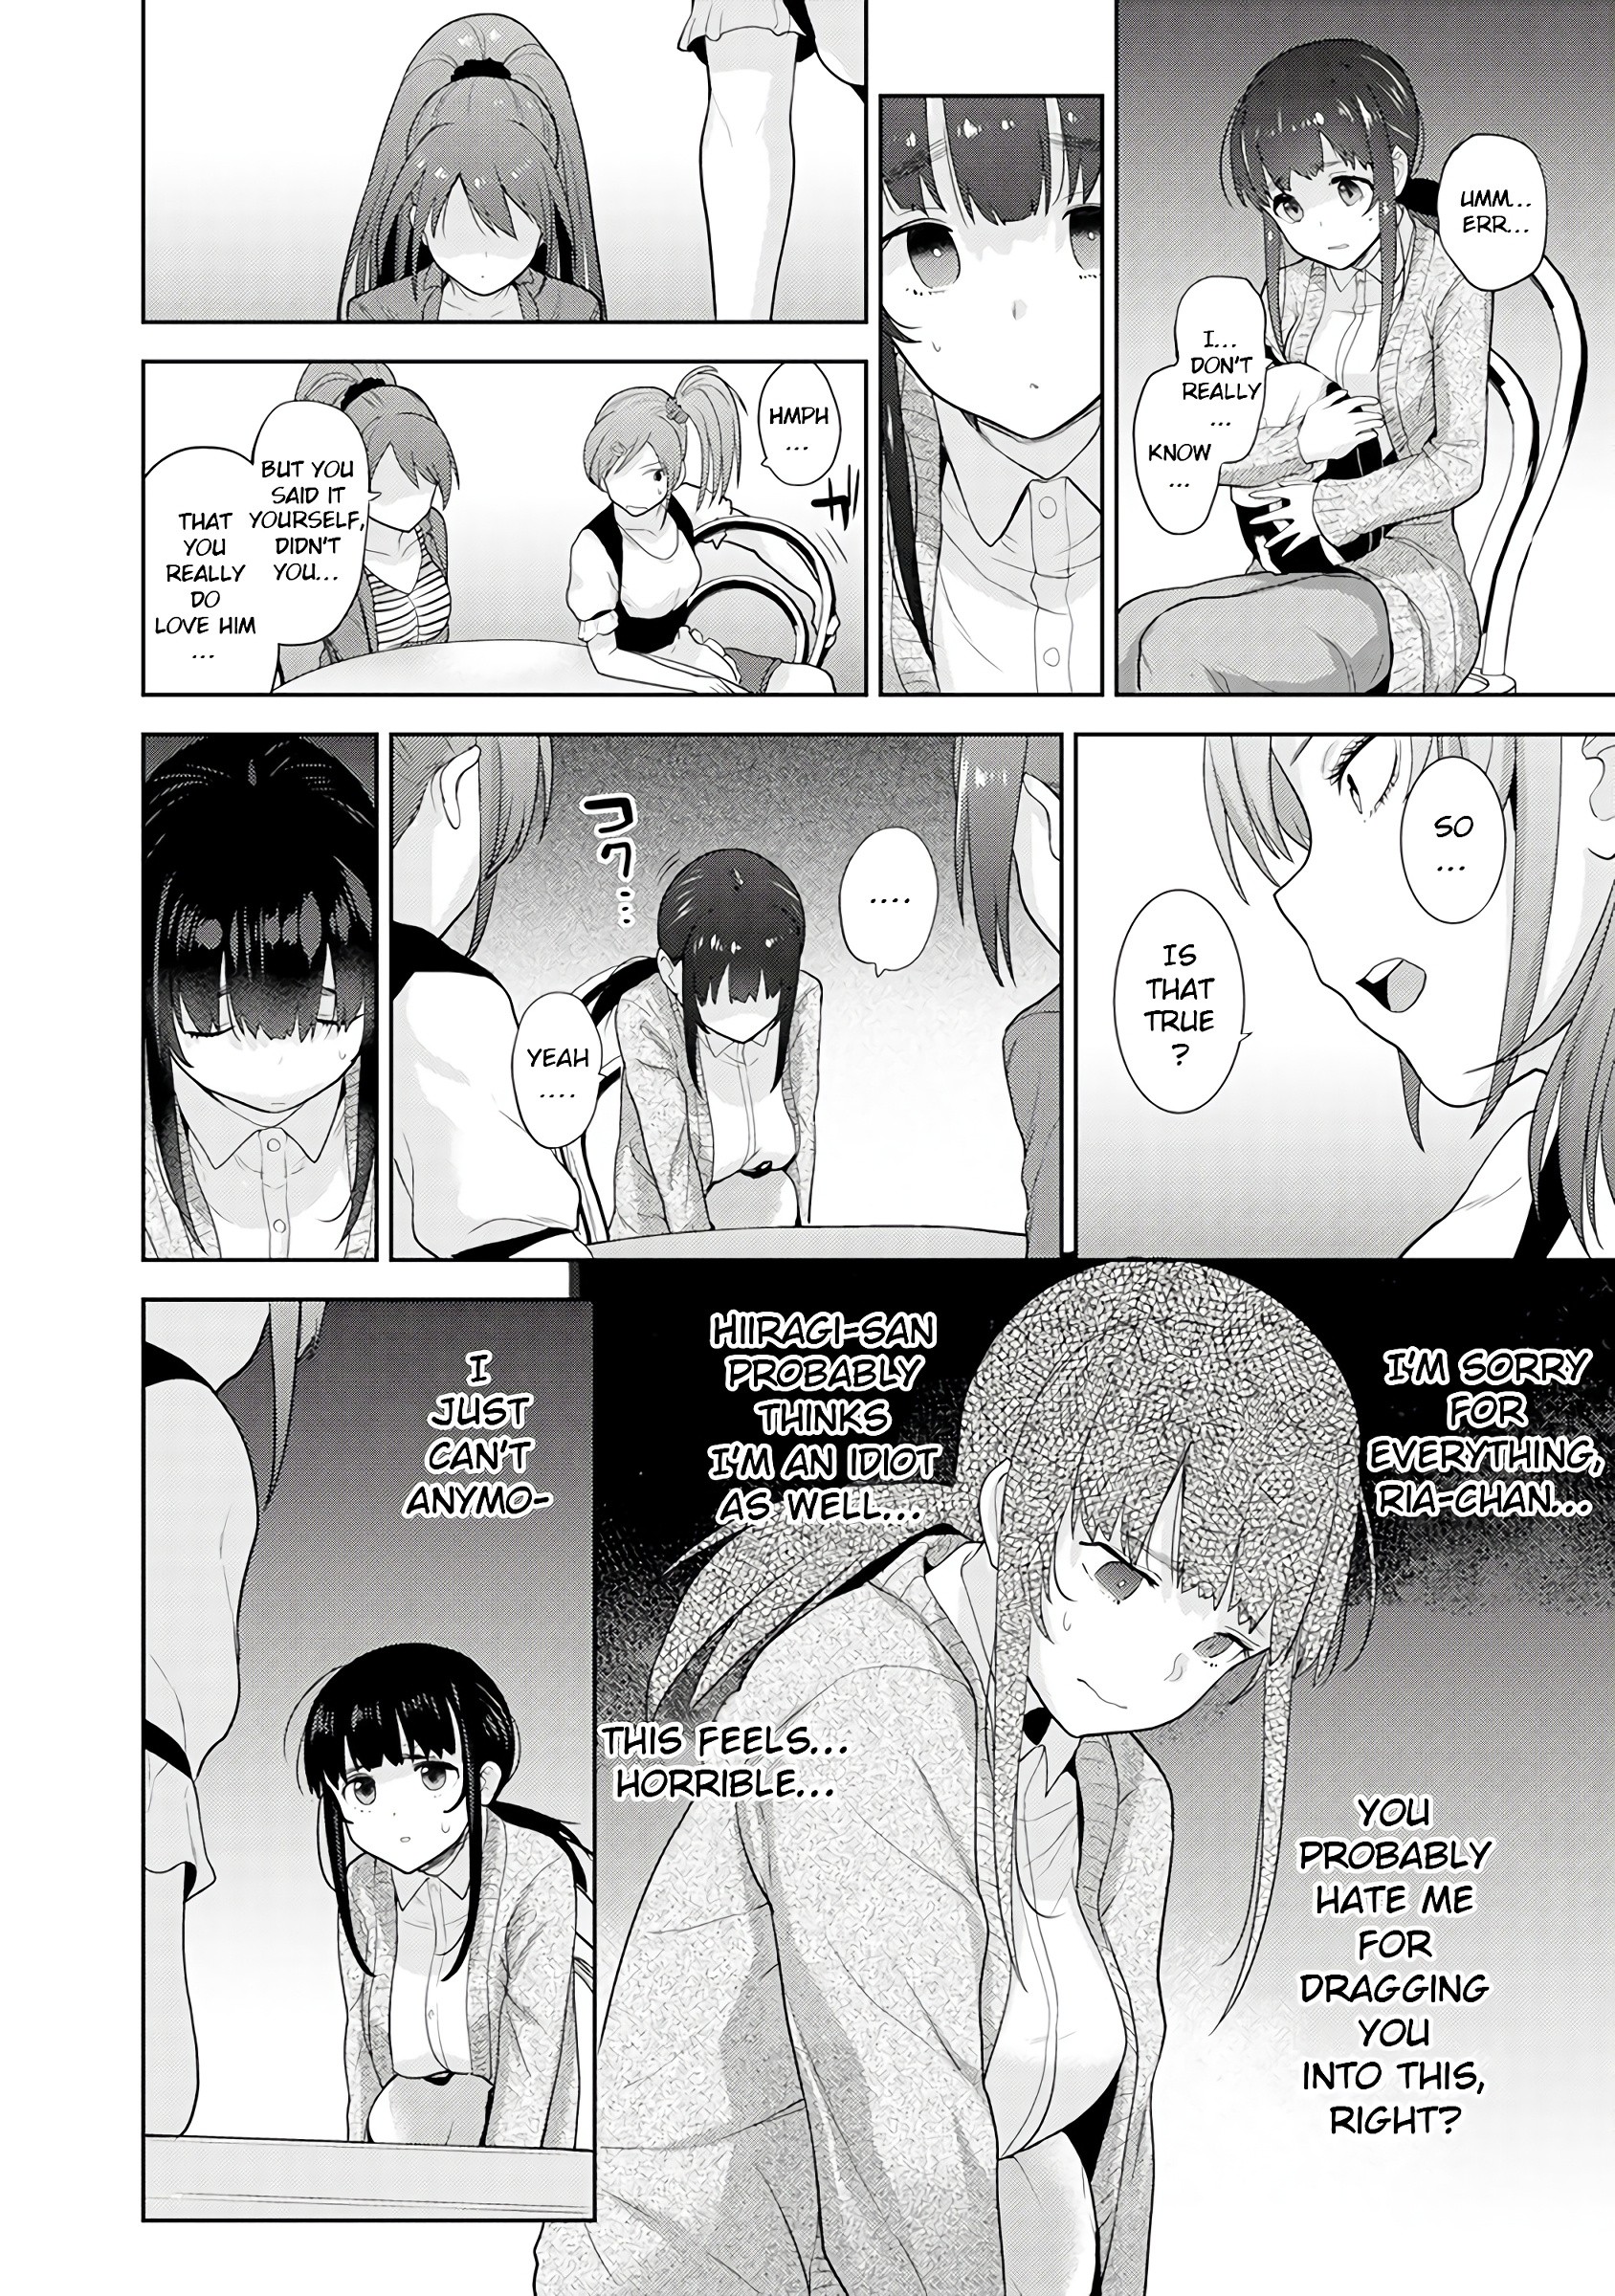 Method to Catch a Pretty Girl 9 hentai manga picture 14